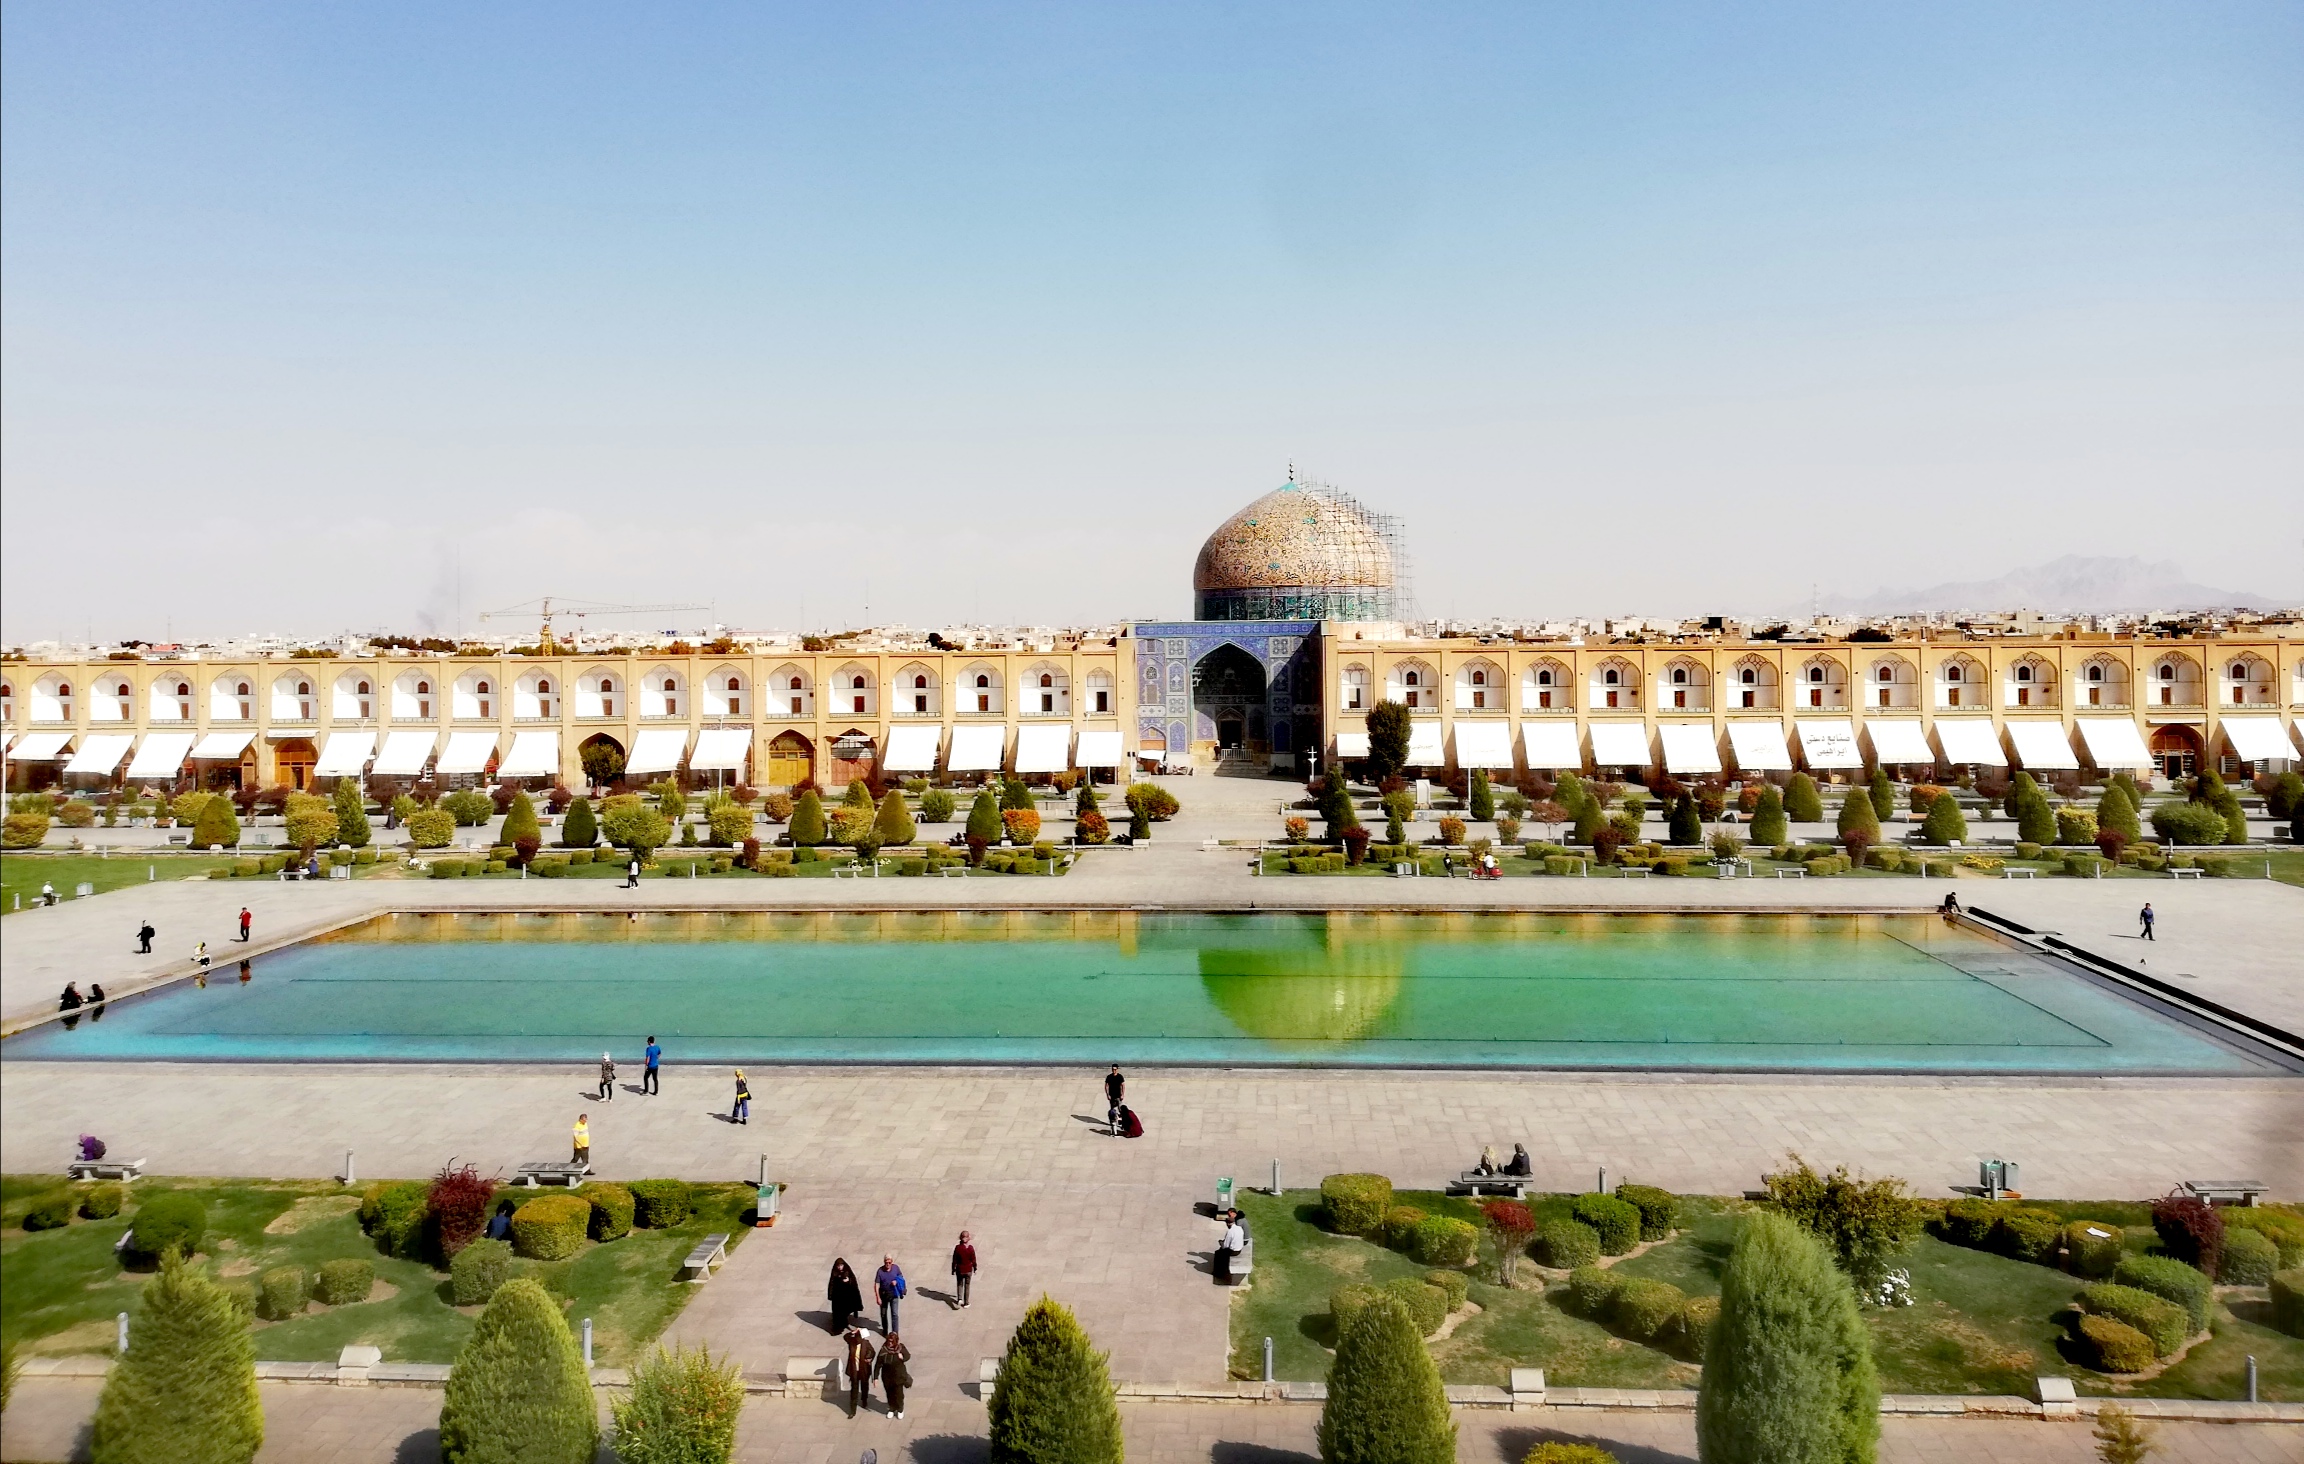 Naqsh - e - Jahan - the large public square in Isfahan